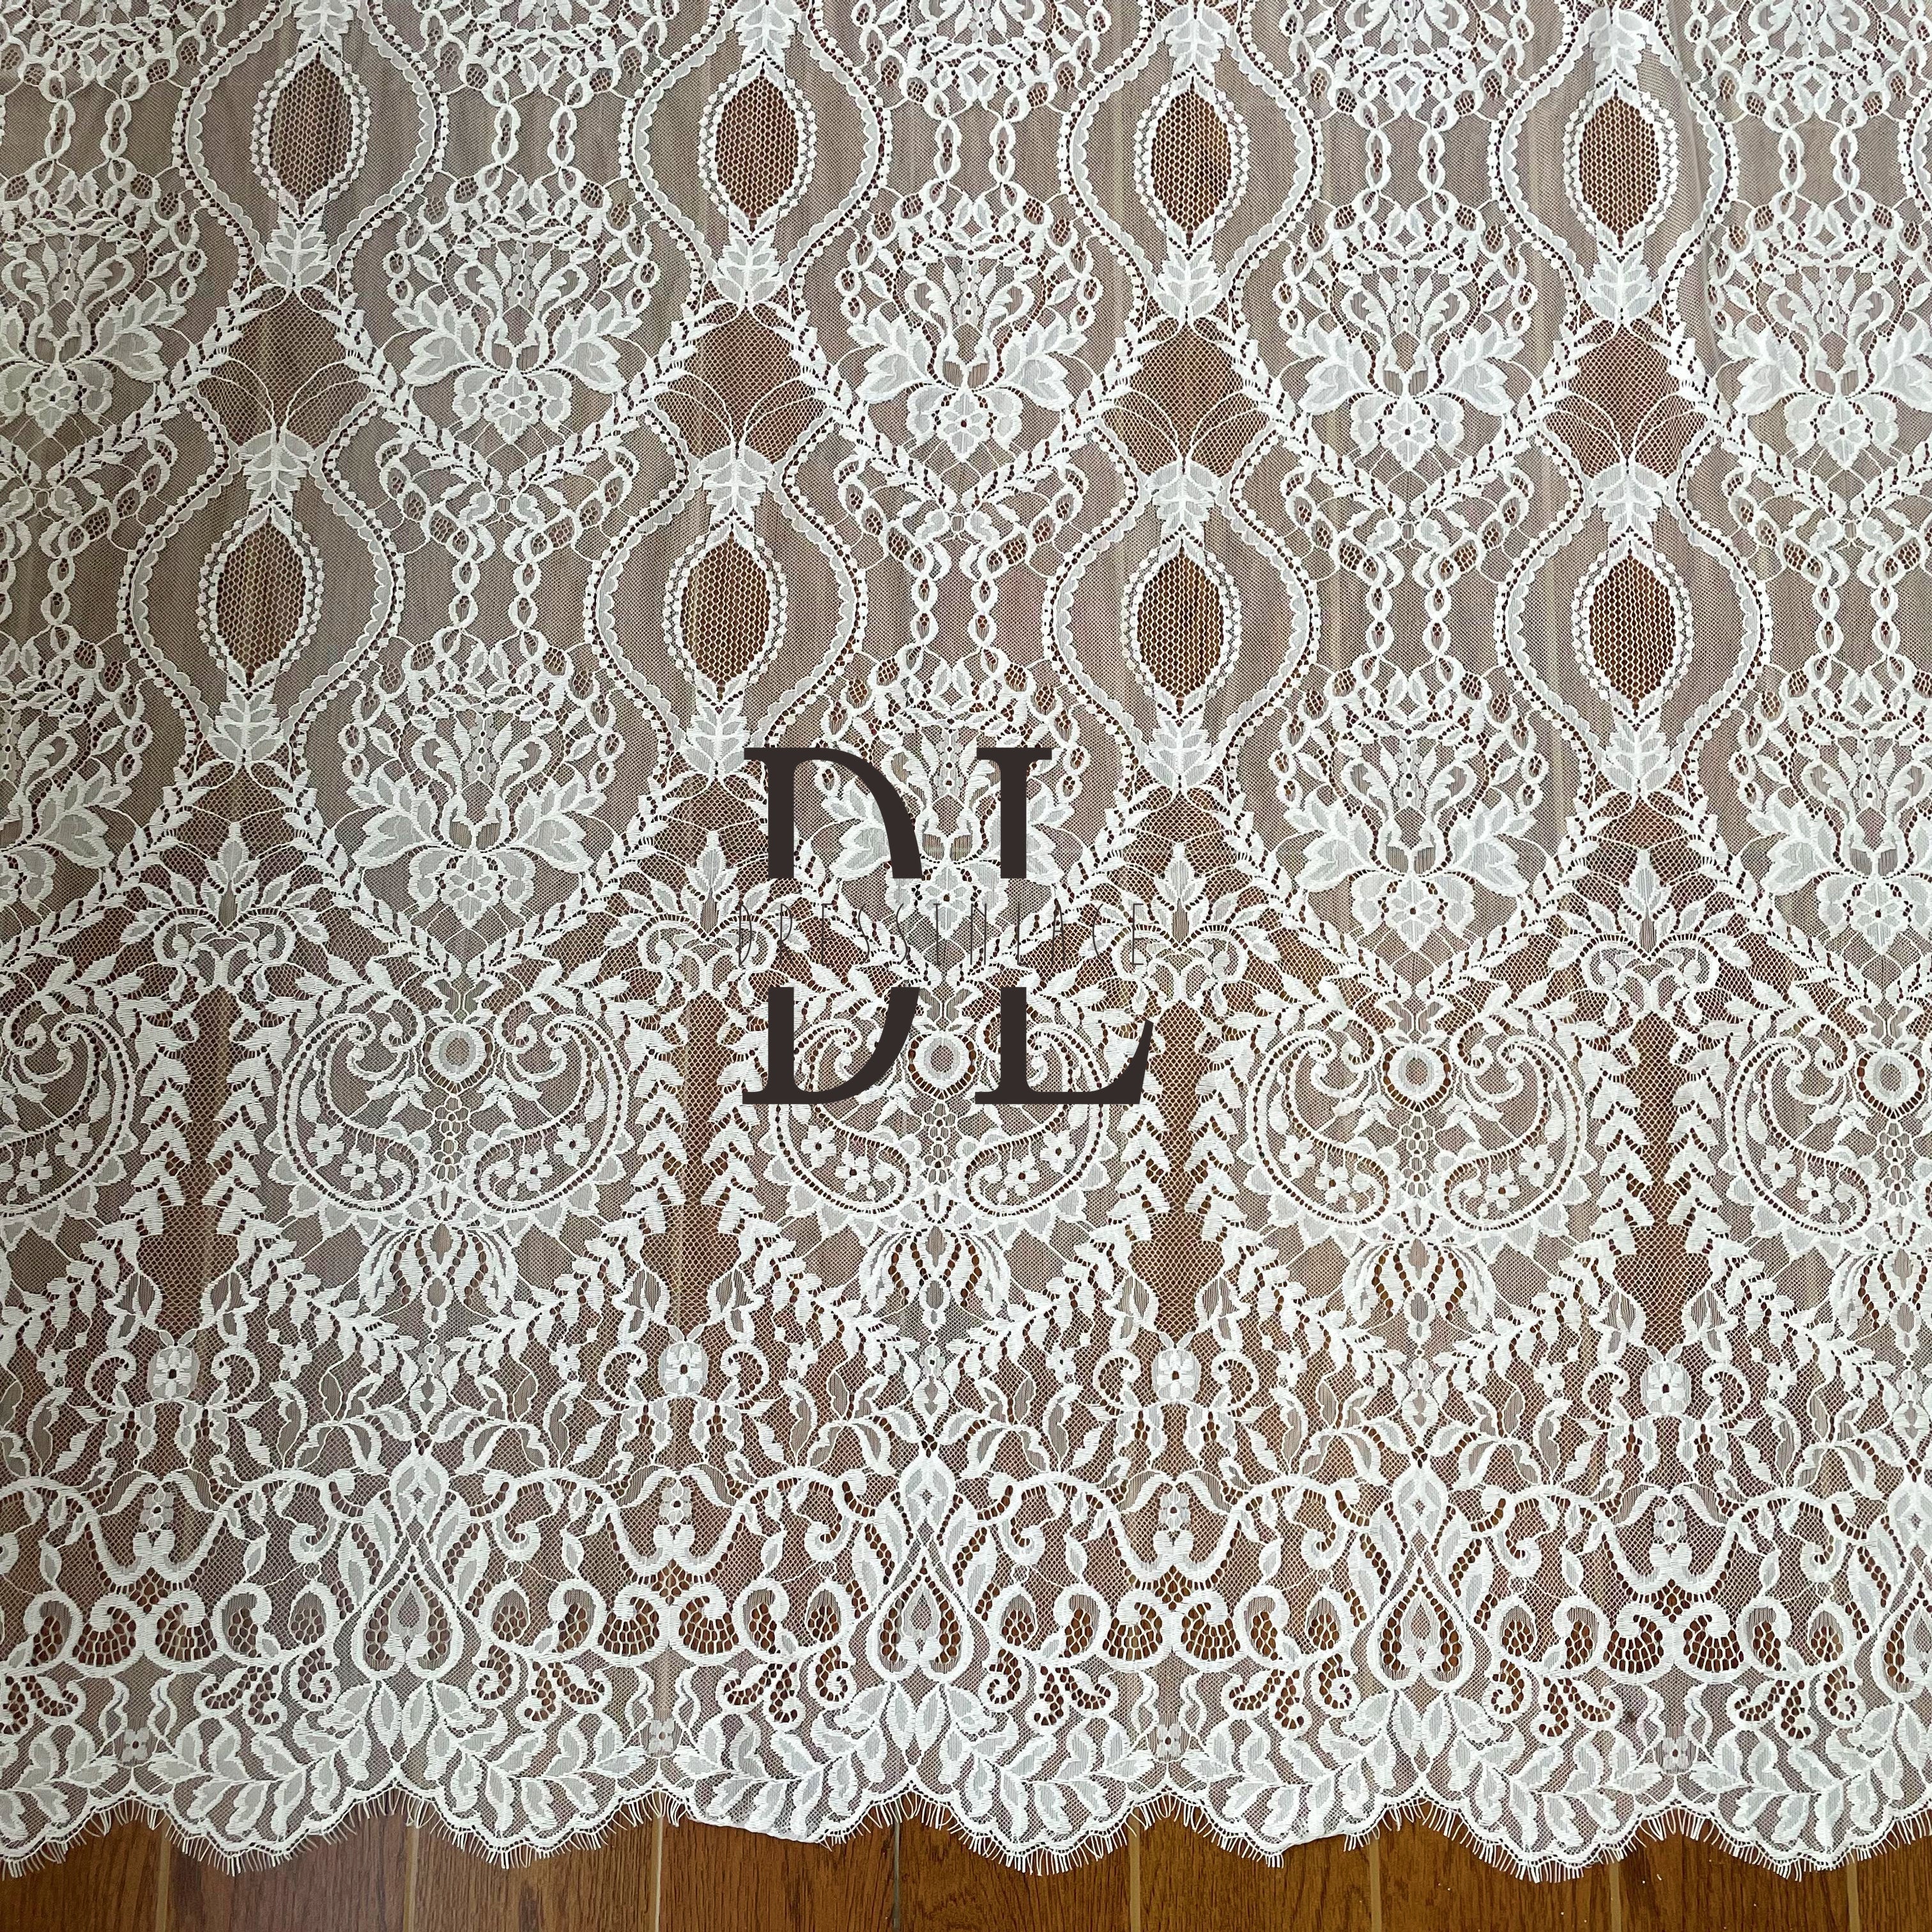 DL15101 French lace eyelash fabric for Wedding Dress - Soft and Exquisite Eyelash Material 3yards per pieces